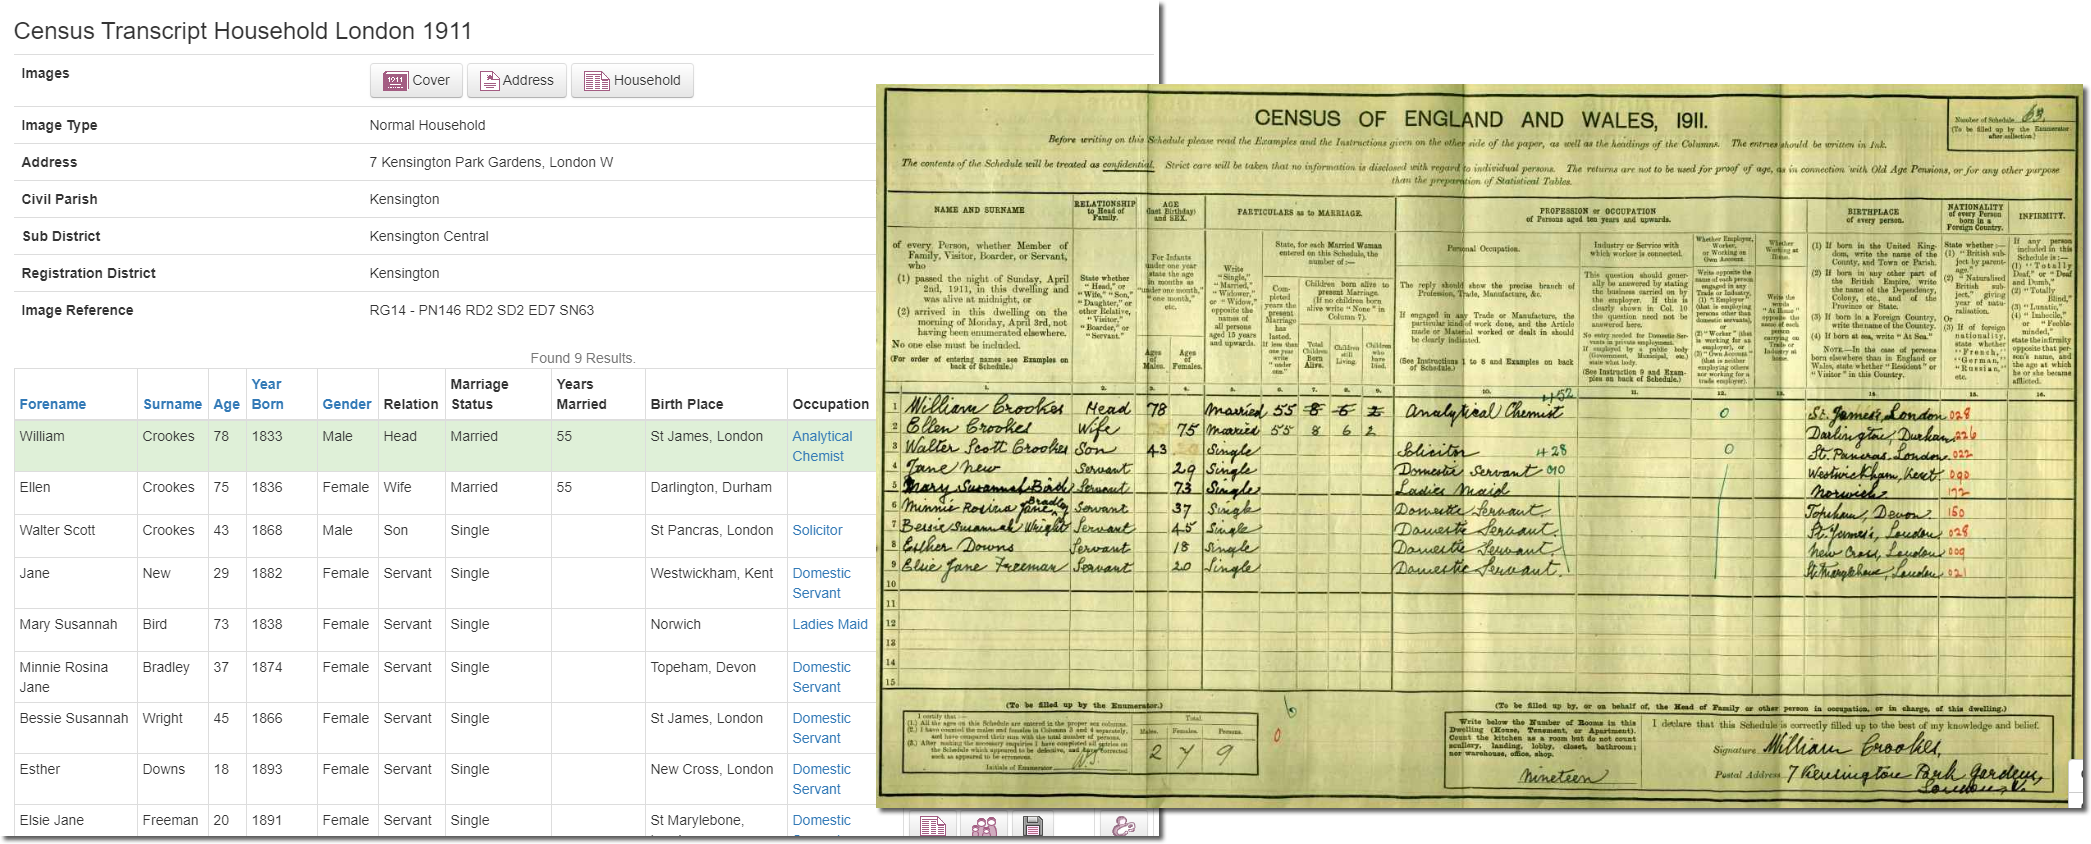 Sir William Crookes in the 1911 Census on TheGenealogist